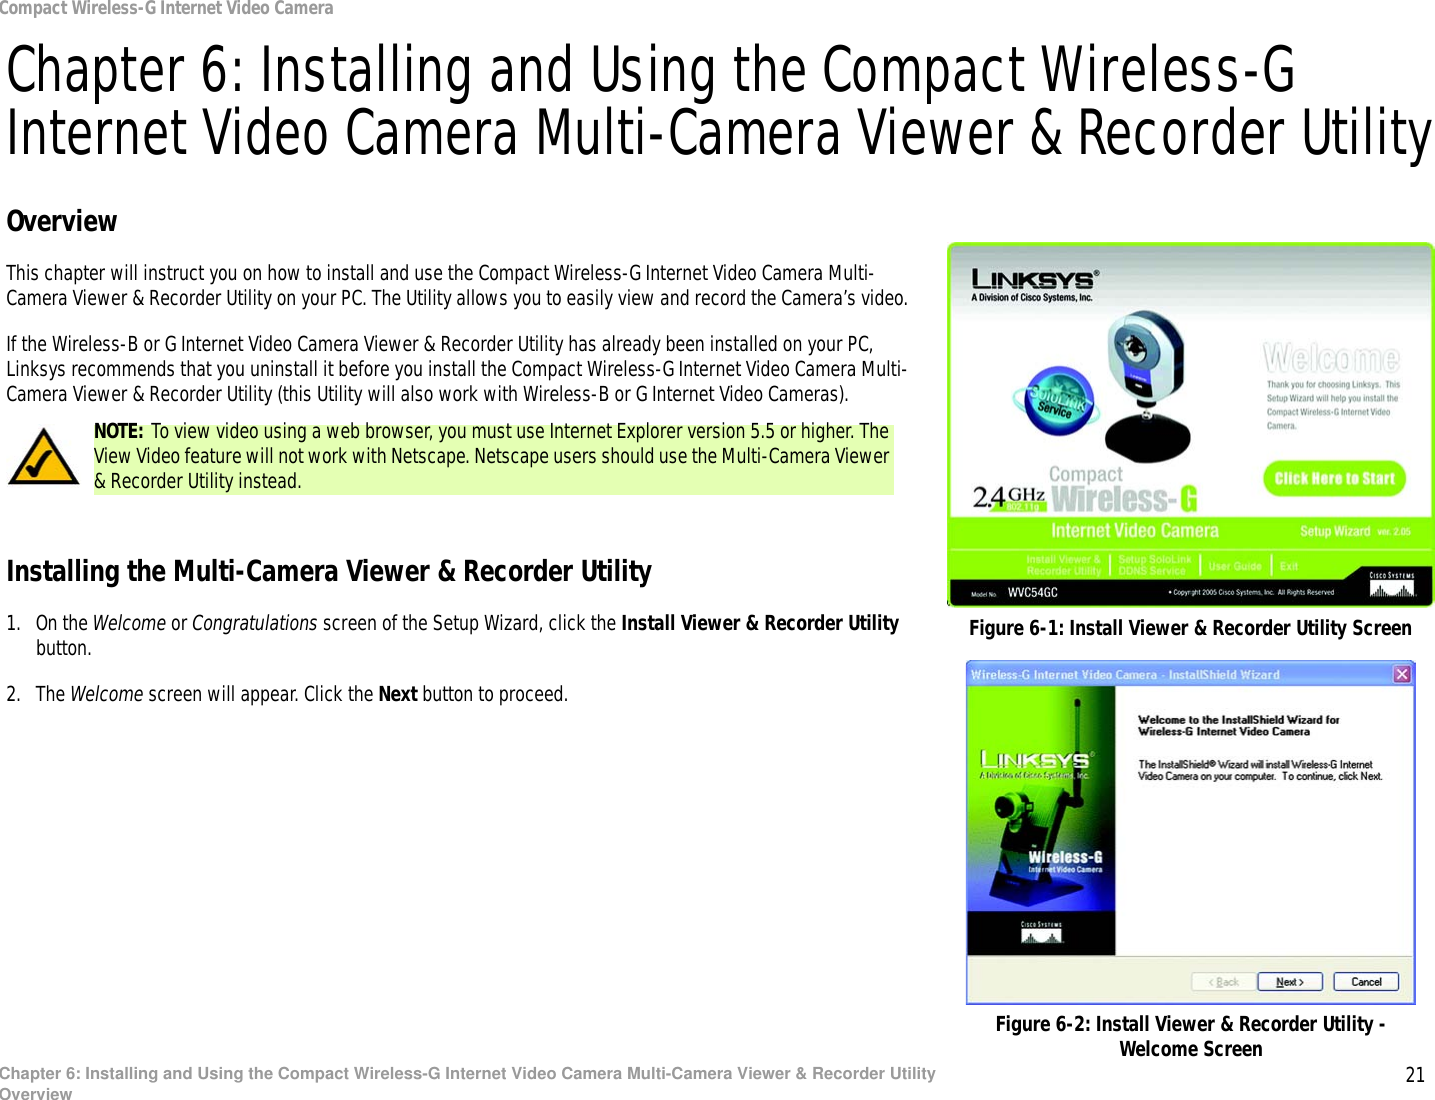 21Chapter 6: Installing and Using the Compact Wireless-G Internet Video Camera Multi-Camera Viewer &amp; Recorder UtilityOverviewCompact Wireless-G Internet Video CameraChapter 6: Installing and Using the Compact Wireless-G Internet Video Camera Multi-Camera Viewer &amp; Recorder UtilityOverviewThis chapter will instruct you on how to install and use the Compact Wireless-G Internet Video Camera Multi-Camera Viewer &amp; Recorder Utility on your PC. The Utility allows you to easily view and record the Camera’s video.If the Wireless-B or G Internet Video Camera Viewer &amp; Recorder Utility has already been installed on your PC, Linksys recommends that you uninstall it before you install the Compact Wireless-G Internet Video Camera Multi-Camera Viewer &amp; Recorder Utility (this Utility will also work with Wireless-B or G Internet Video Cameras).Installing the Multi-Camera Viewer &amp; Recorder Utility1. On the Welcome or Congratulations screen of the Setup Wizard, click the Install Viewer &amp; Recorder Utility button.2. The Welcome screen will appear. Click the Next button to proceed.Figure 6-1: Install Viewer &amp; Recorder Utility ScreenFigure 6-2: Install Viewer &amp; Recorder Utility - Welcome ScreenNOTE: To view video using a web browser, you must use Internet Explorer version 5.5 or higher. The View Video feature will not work with Netscape. Netscape users should use the Multi-Camera Viewer &amp; Recorder Utility instead.